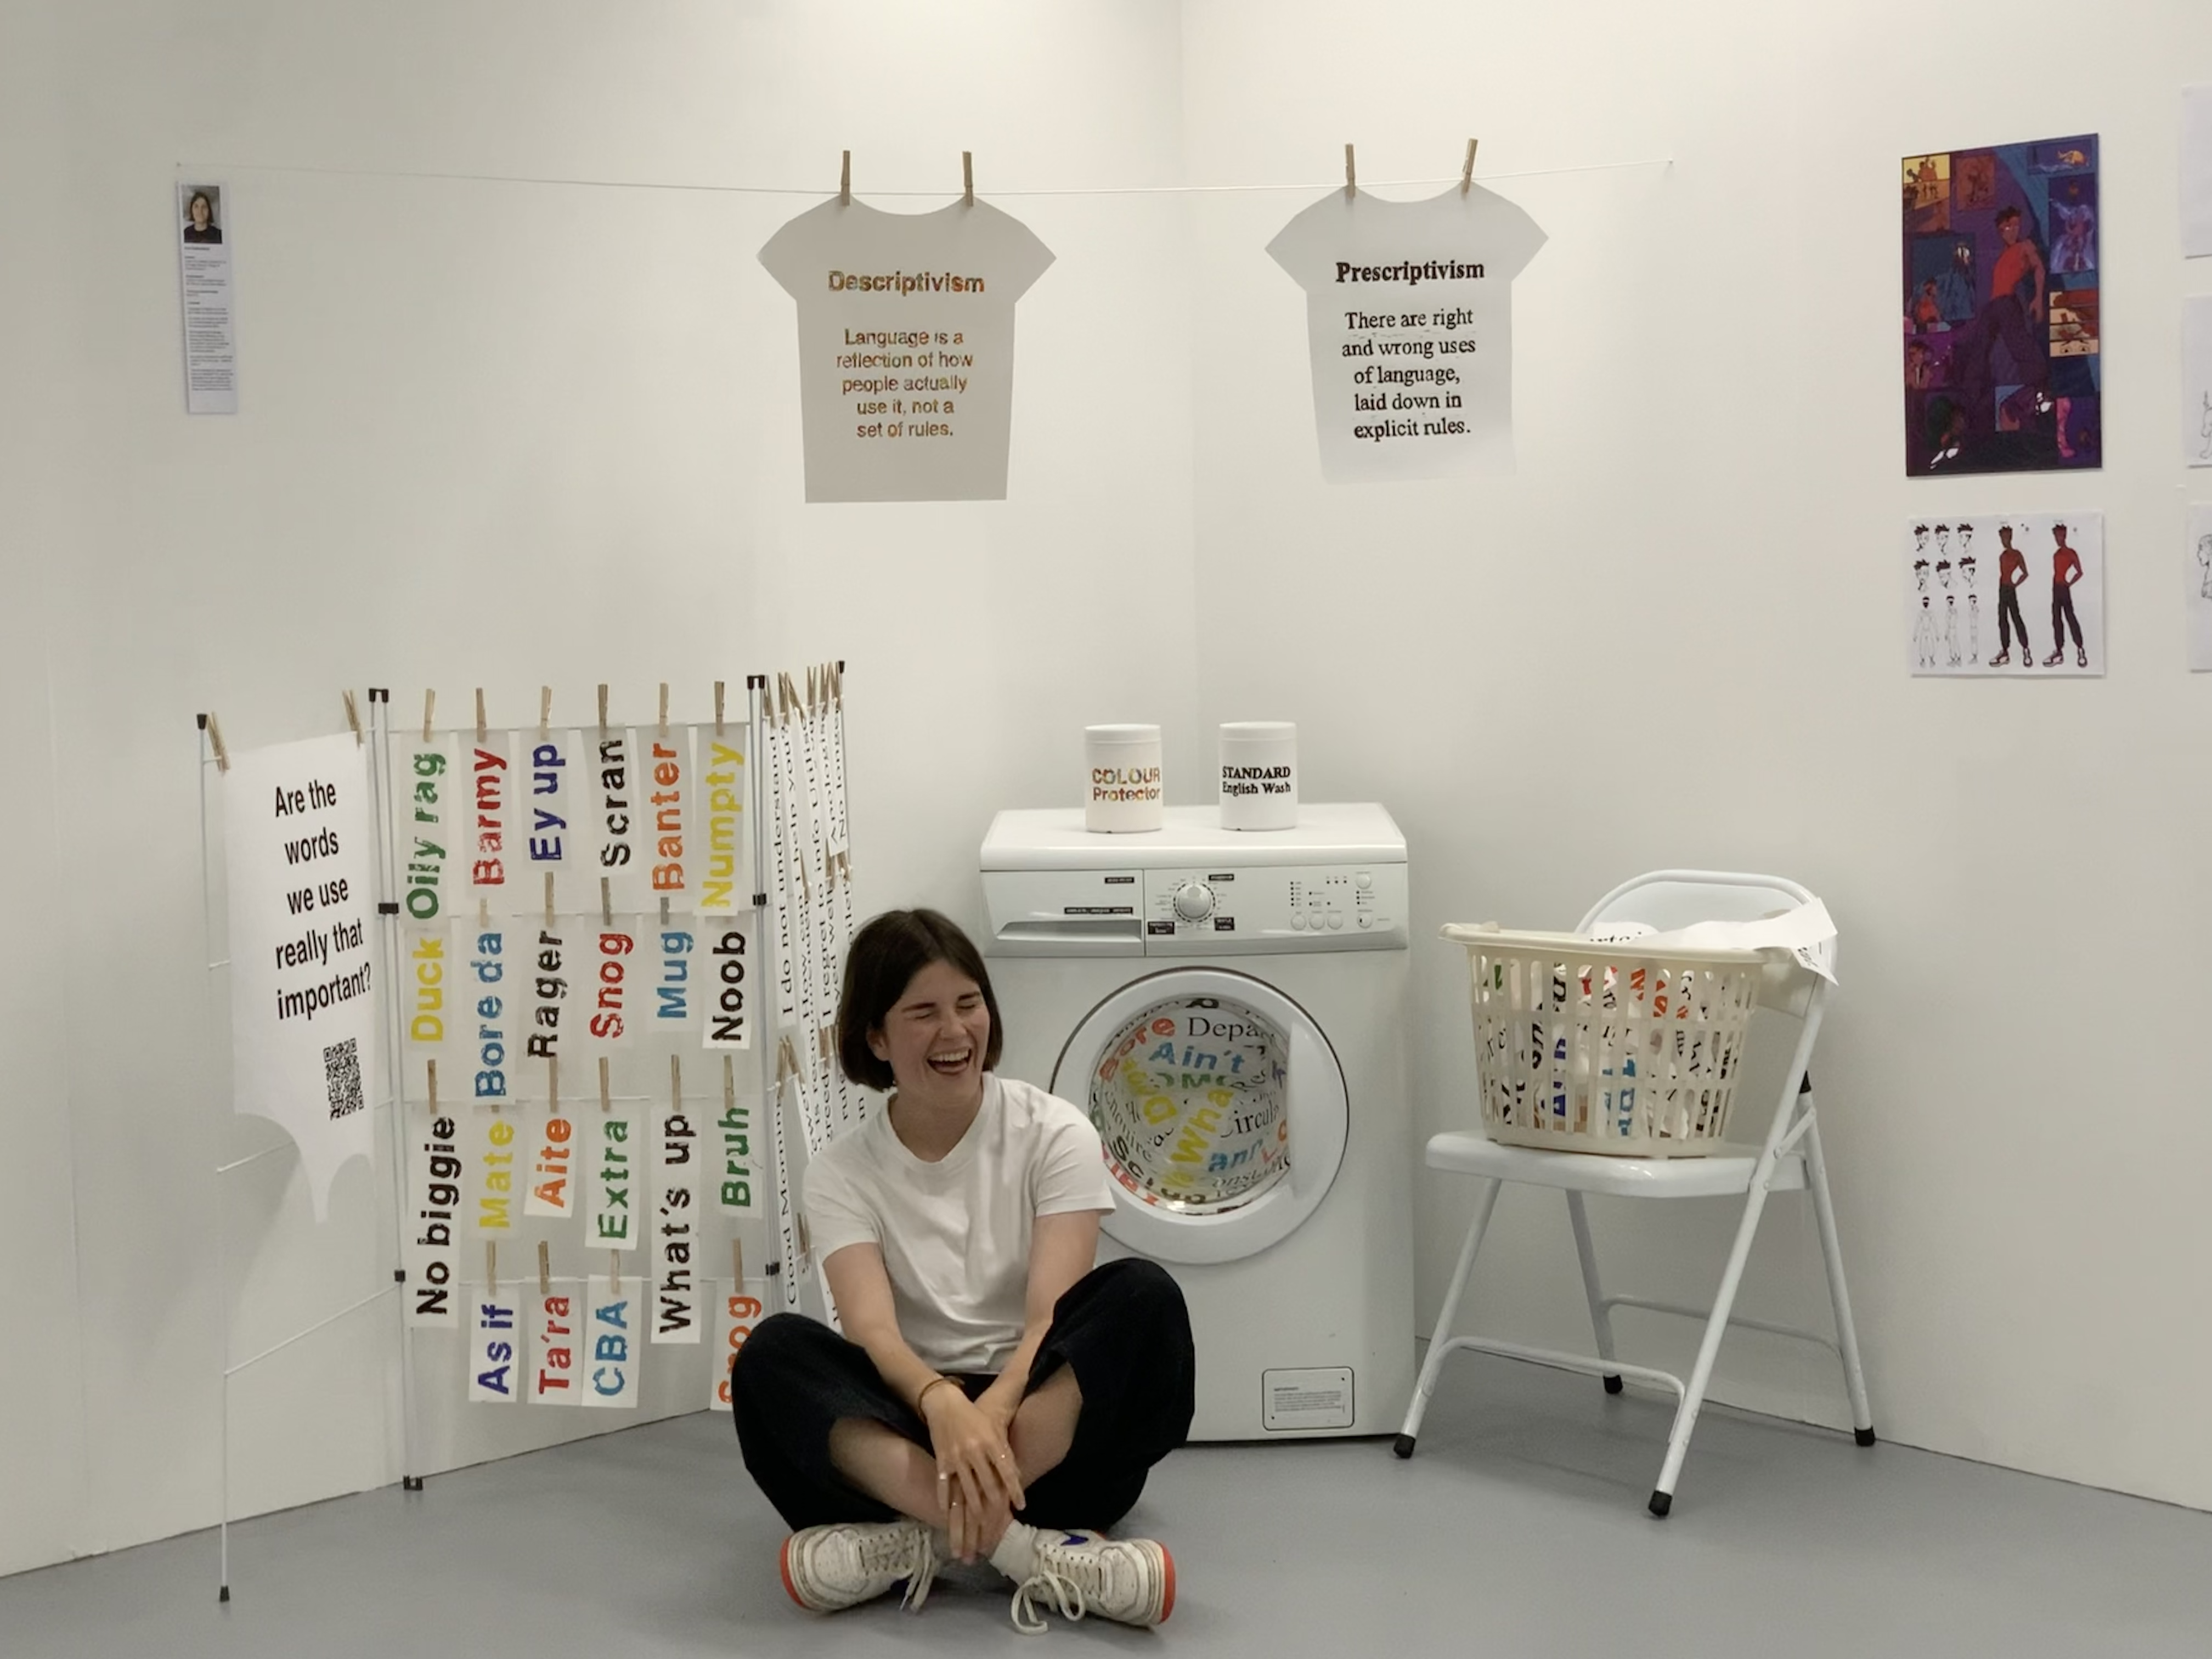 Ava sits cross legged and laughing in the center of frame. Behind her is an artistic display of washing hanging, a washing machine and a washing basket on a chair. Greetings from around the world are written on the laundry in different colours, and the title of the project reads 'Are the words we use really that important?'